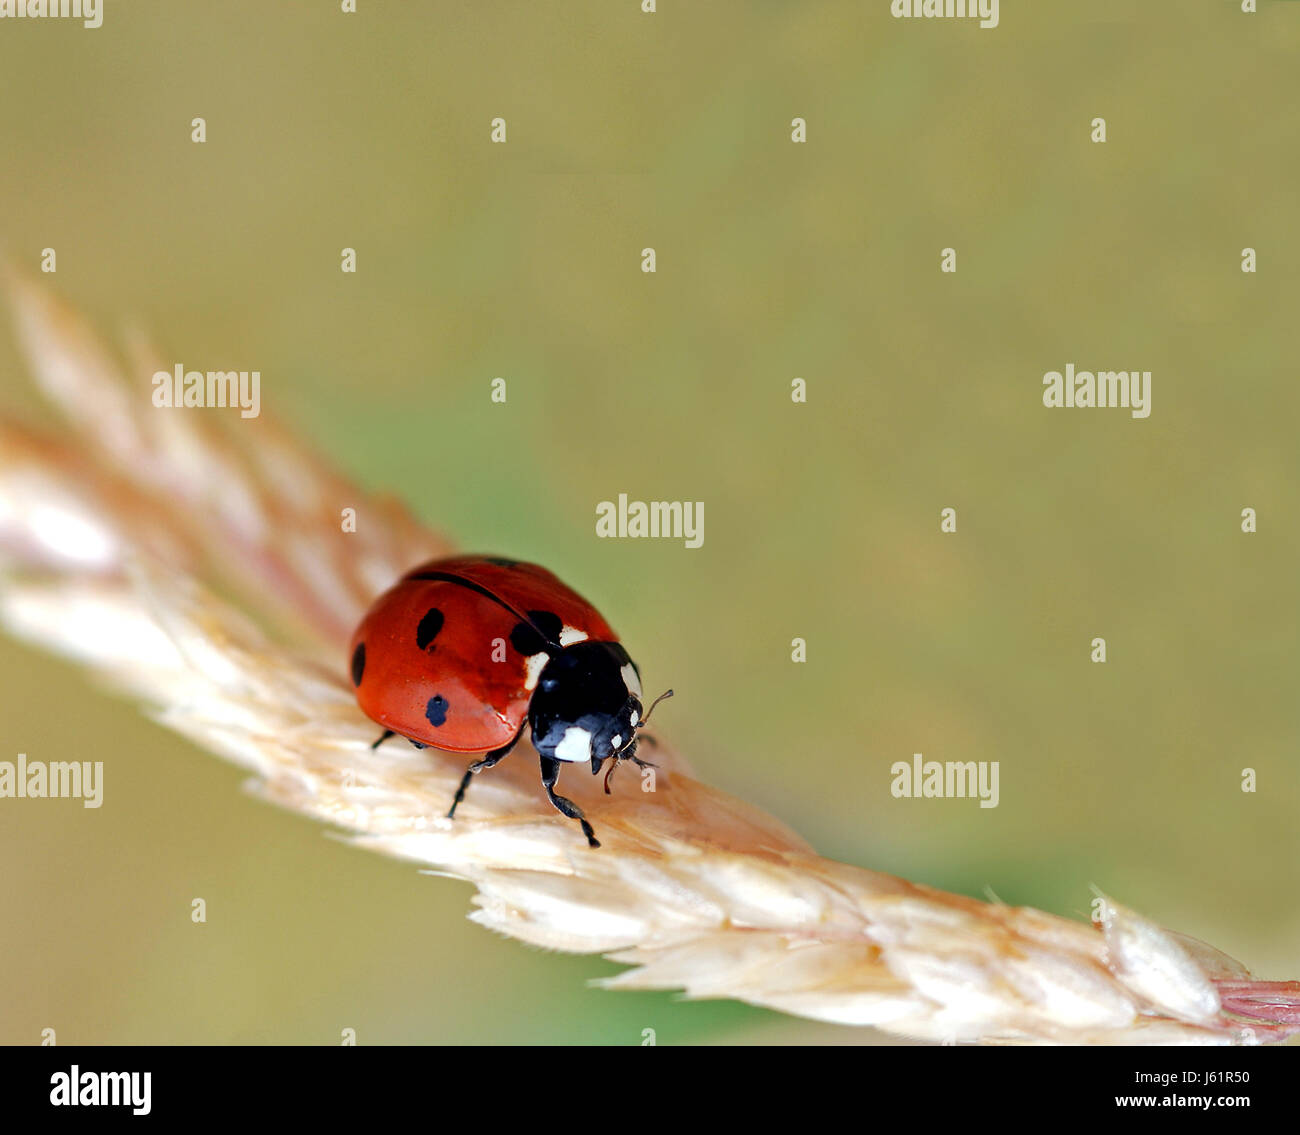 insect beetle red ladybug insect beetle dots beige spotted blade of grass Stock Photo